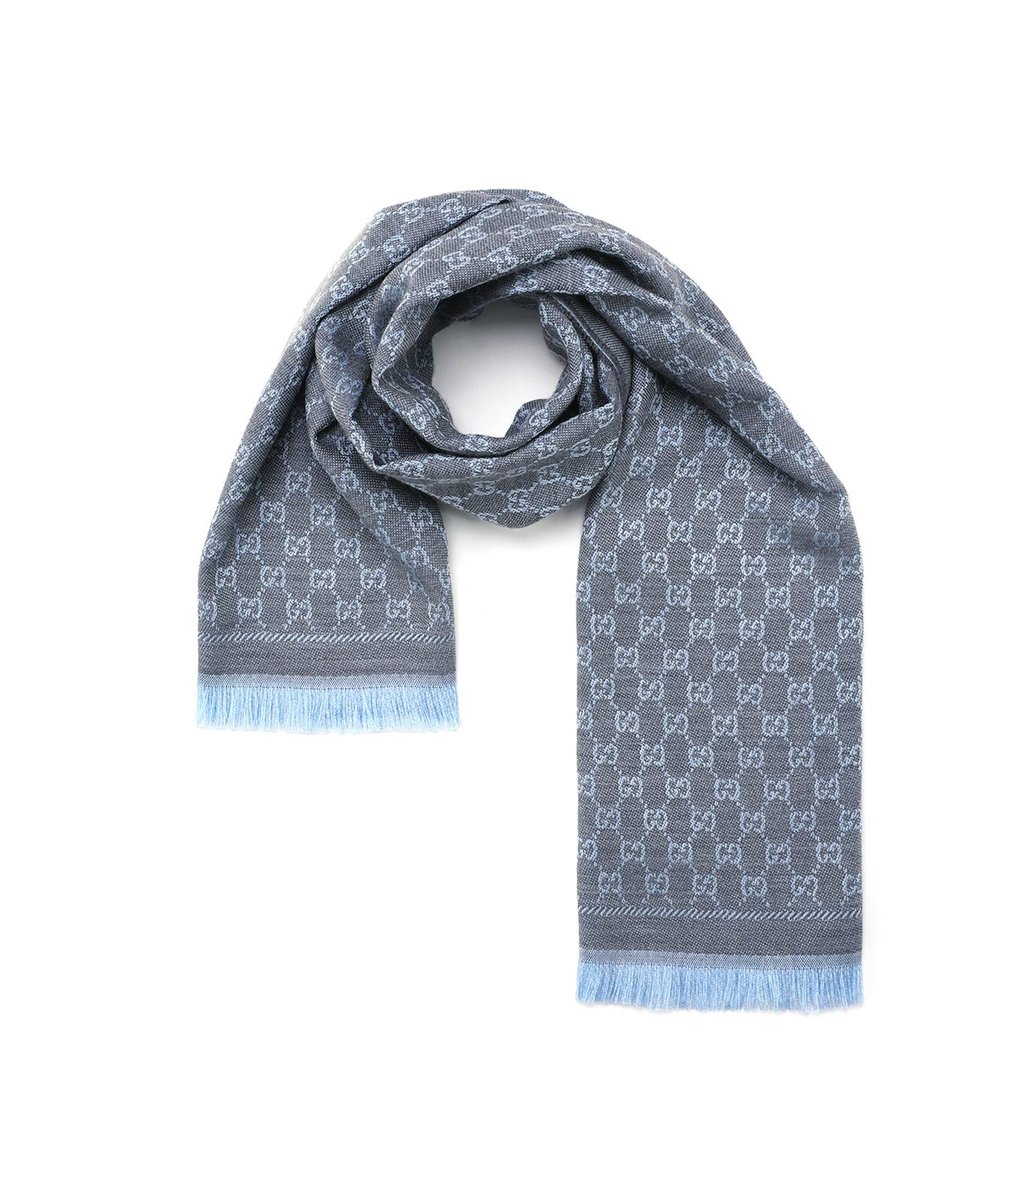 Gucci Wool Gg Jacquard Scarf Scarf (Parallel Import) | HKTVmall The Largest Shopping Platform